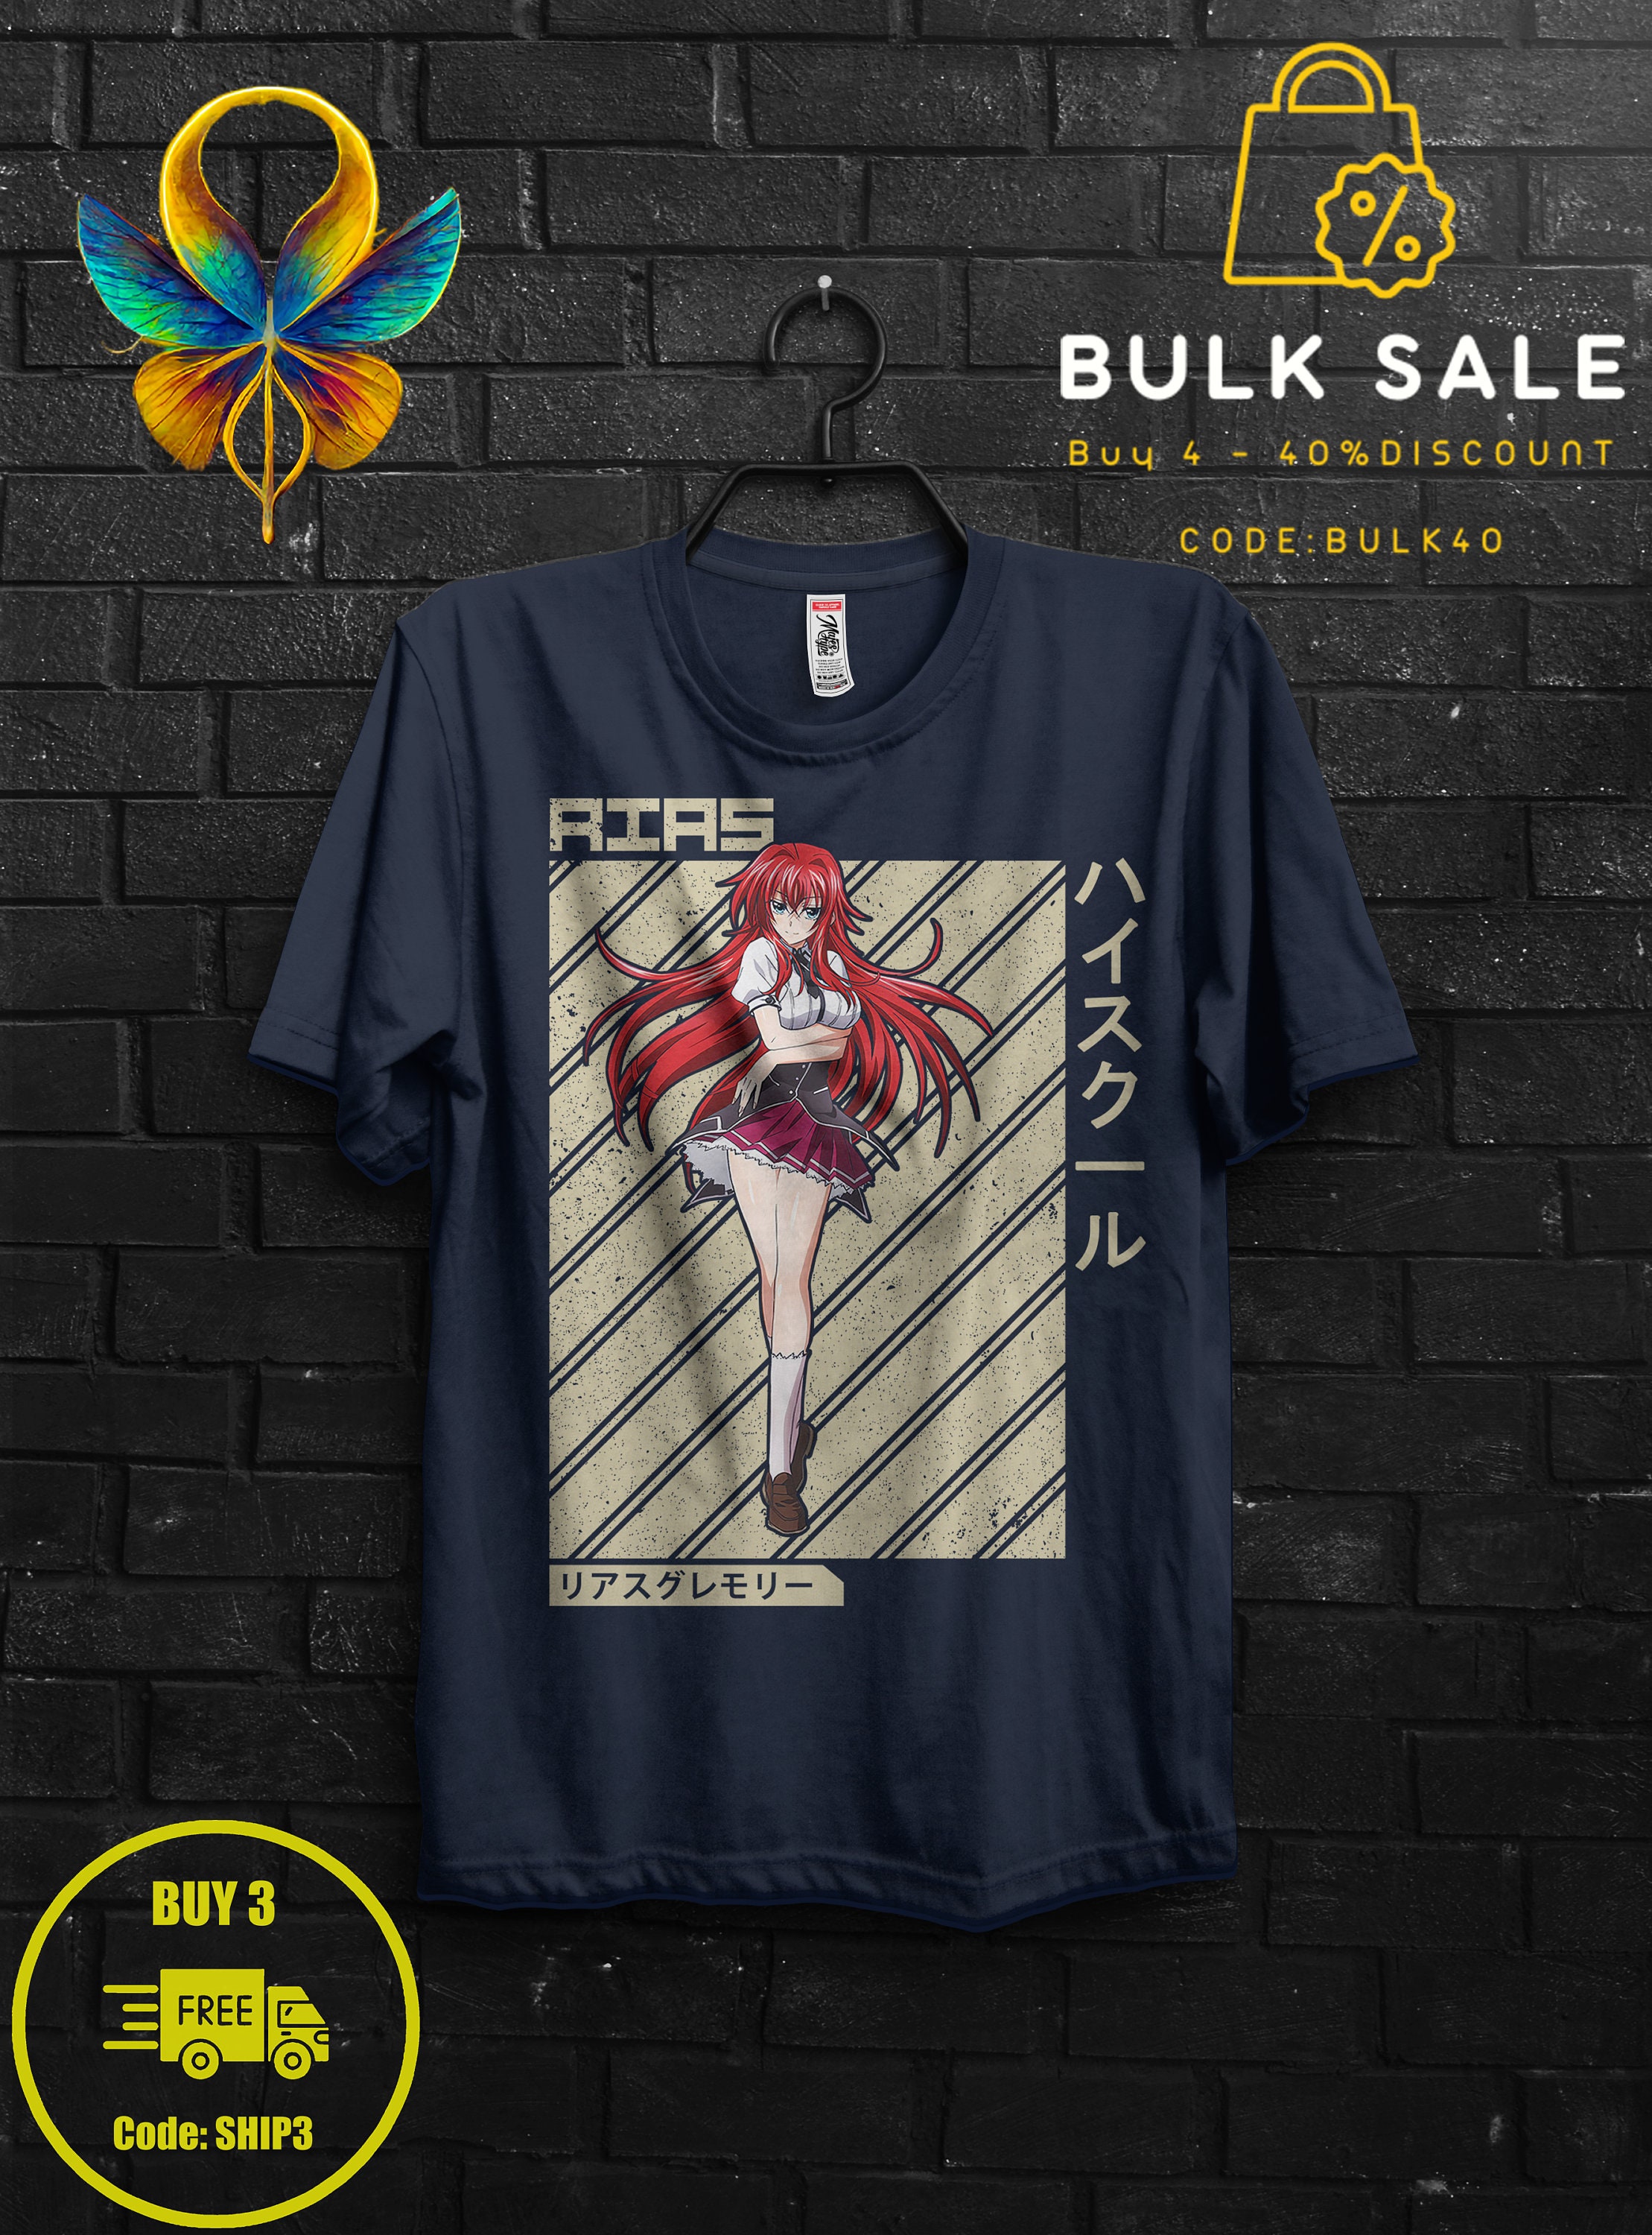 Rias Gremory Shirt Anime Gift Cosplay For Girl,Issei Hyoudou Sweat,Xenovia Appareal For Her,High School DxD Tee,Rossweisse Tshirt For Sitri 1586062416